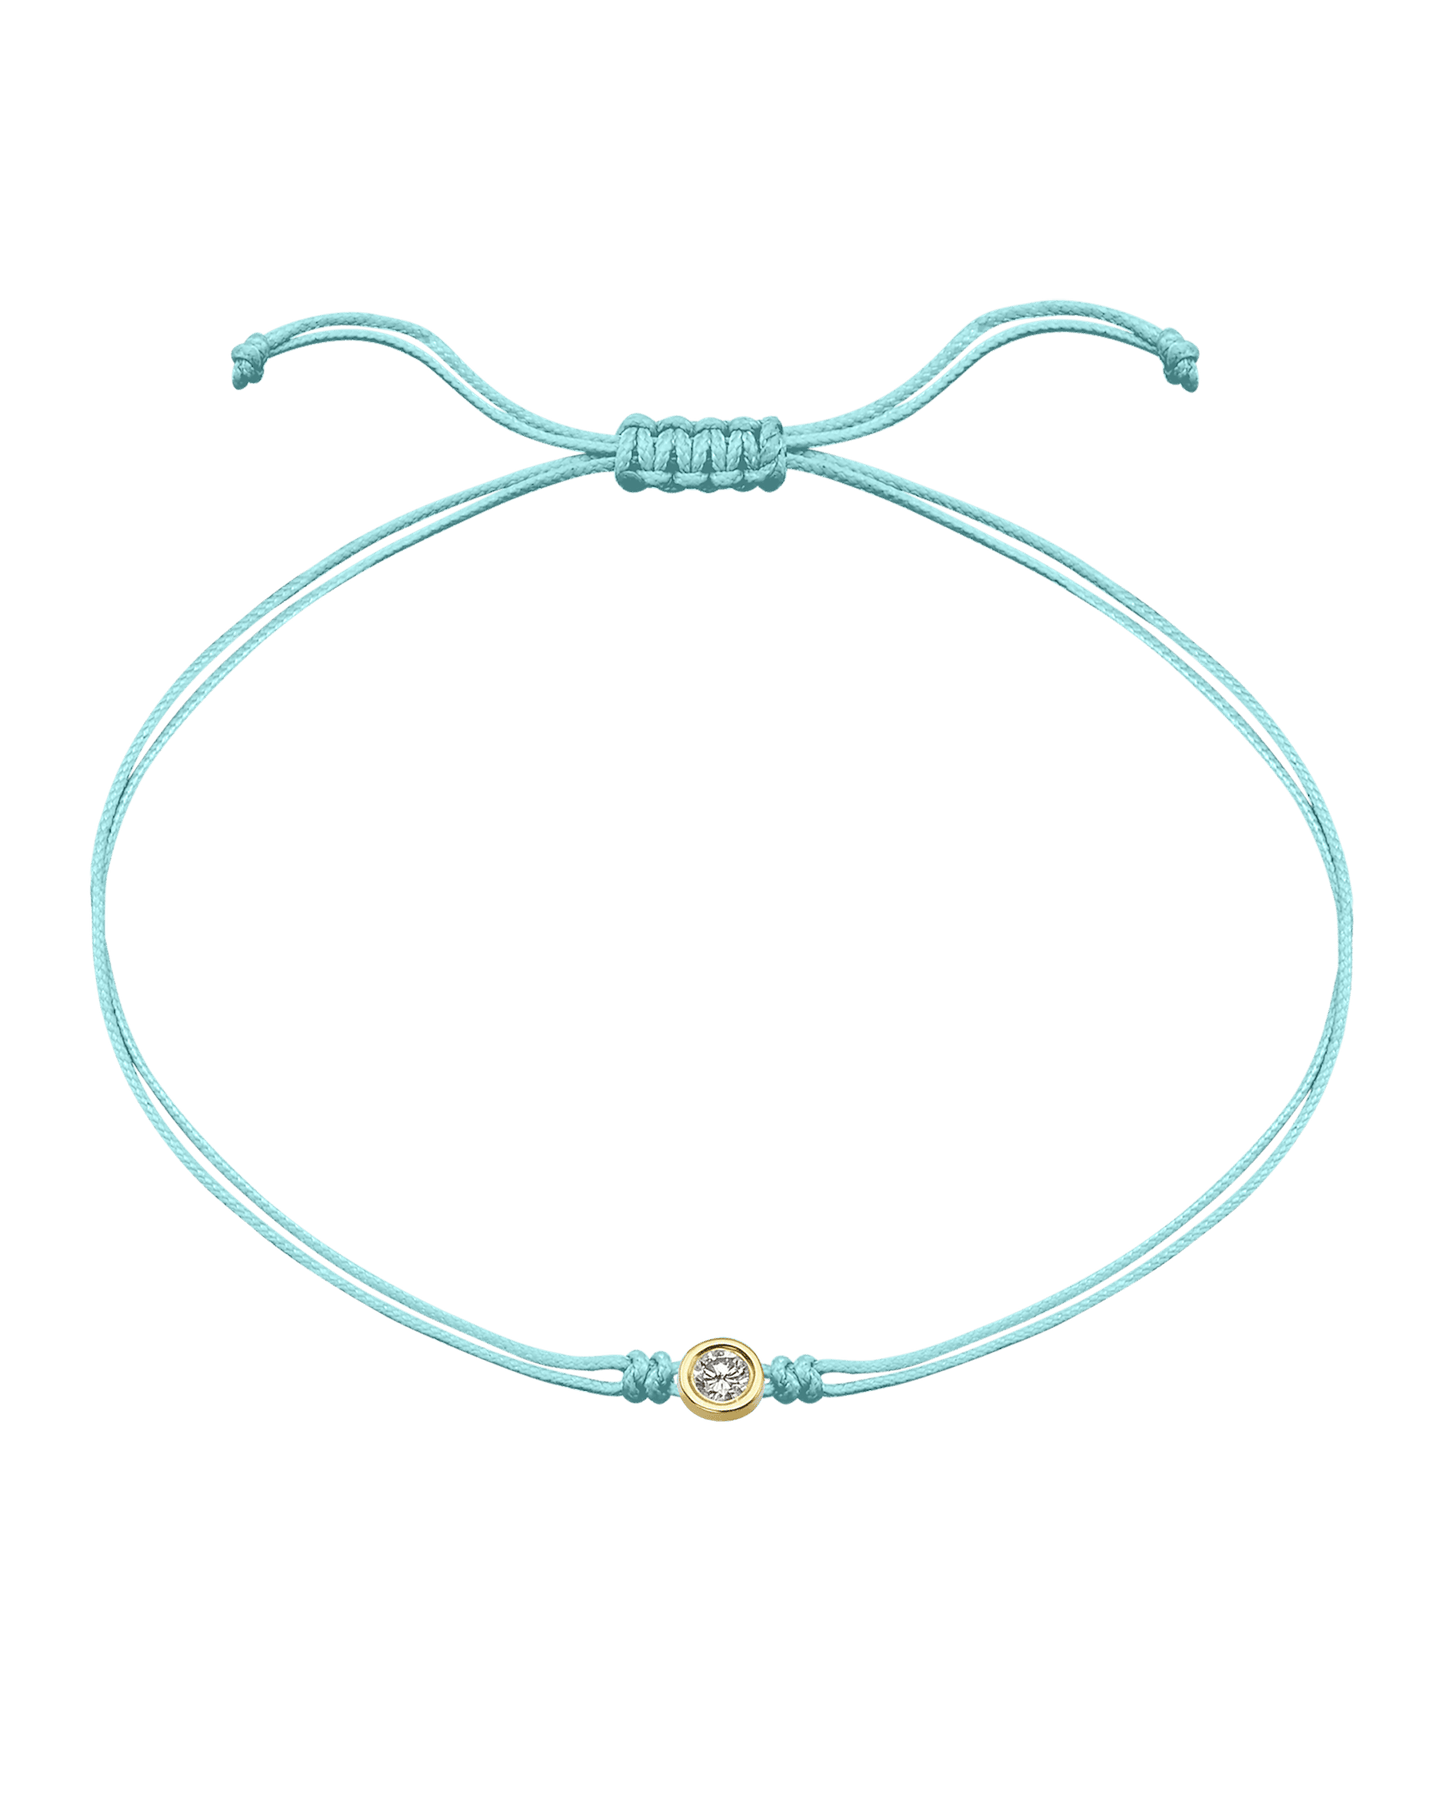 Summer Edition : The Classic String of Love - 14K Yellow Gold Bracelets magal-dev Frozen Blue Daiquiri - Turquoise Large: 0.10ct 